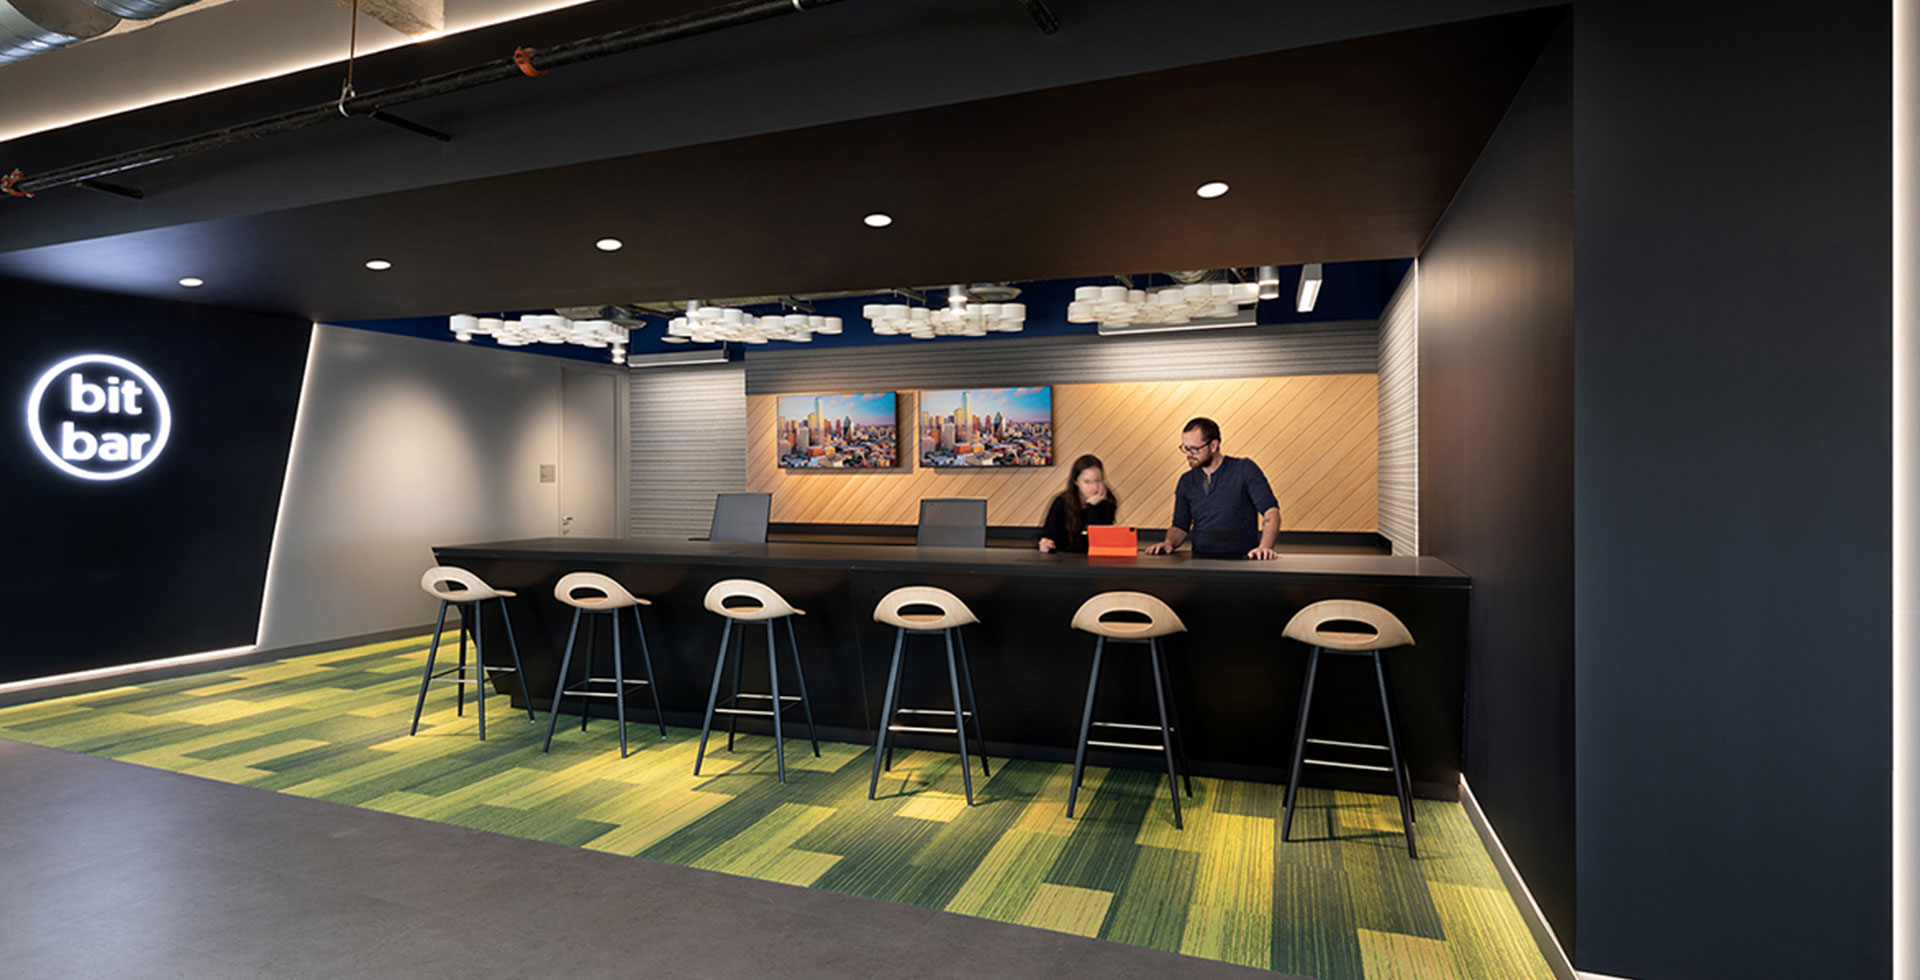 <p>The Bit Bar is a branded name for Vistra’s genius bar technology services on demand kiosk. The intentional bold design emphasizes the space as a beacon for tech help on the third floor landing of the monumental atrium stair.</p>
